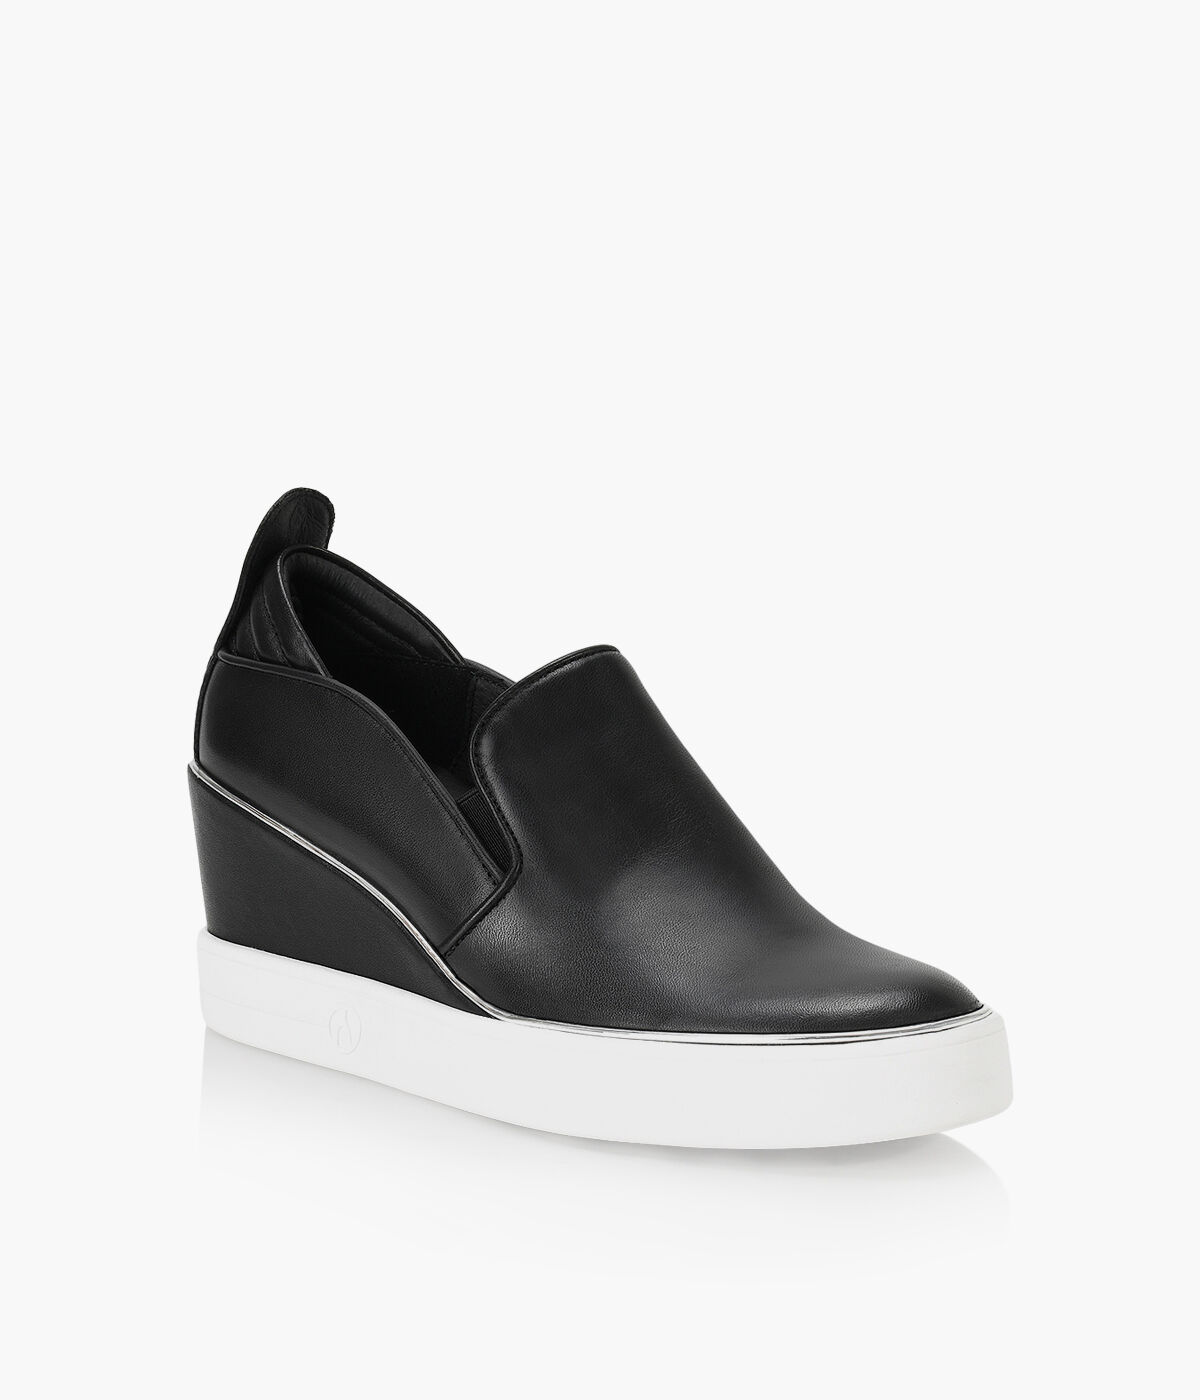 Walk Dream Women's leather wedge sneakers: for sale at 69.99€ on  Mecshopping.it